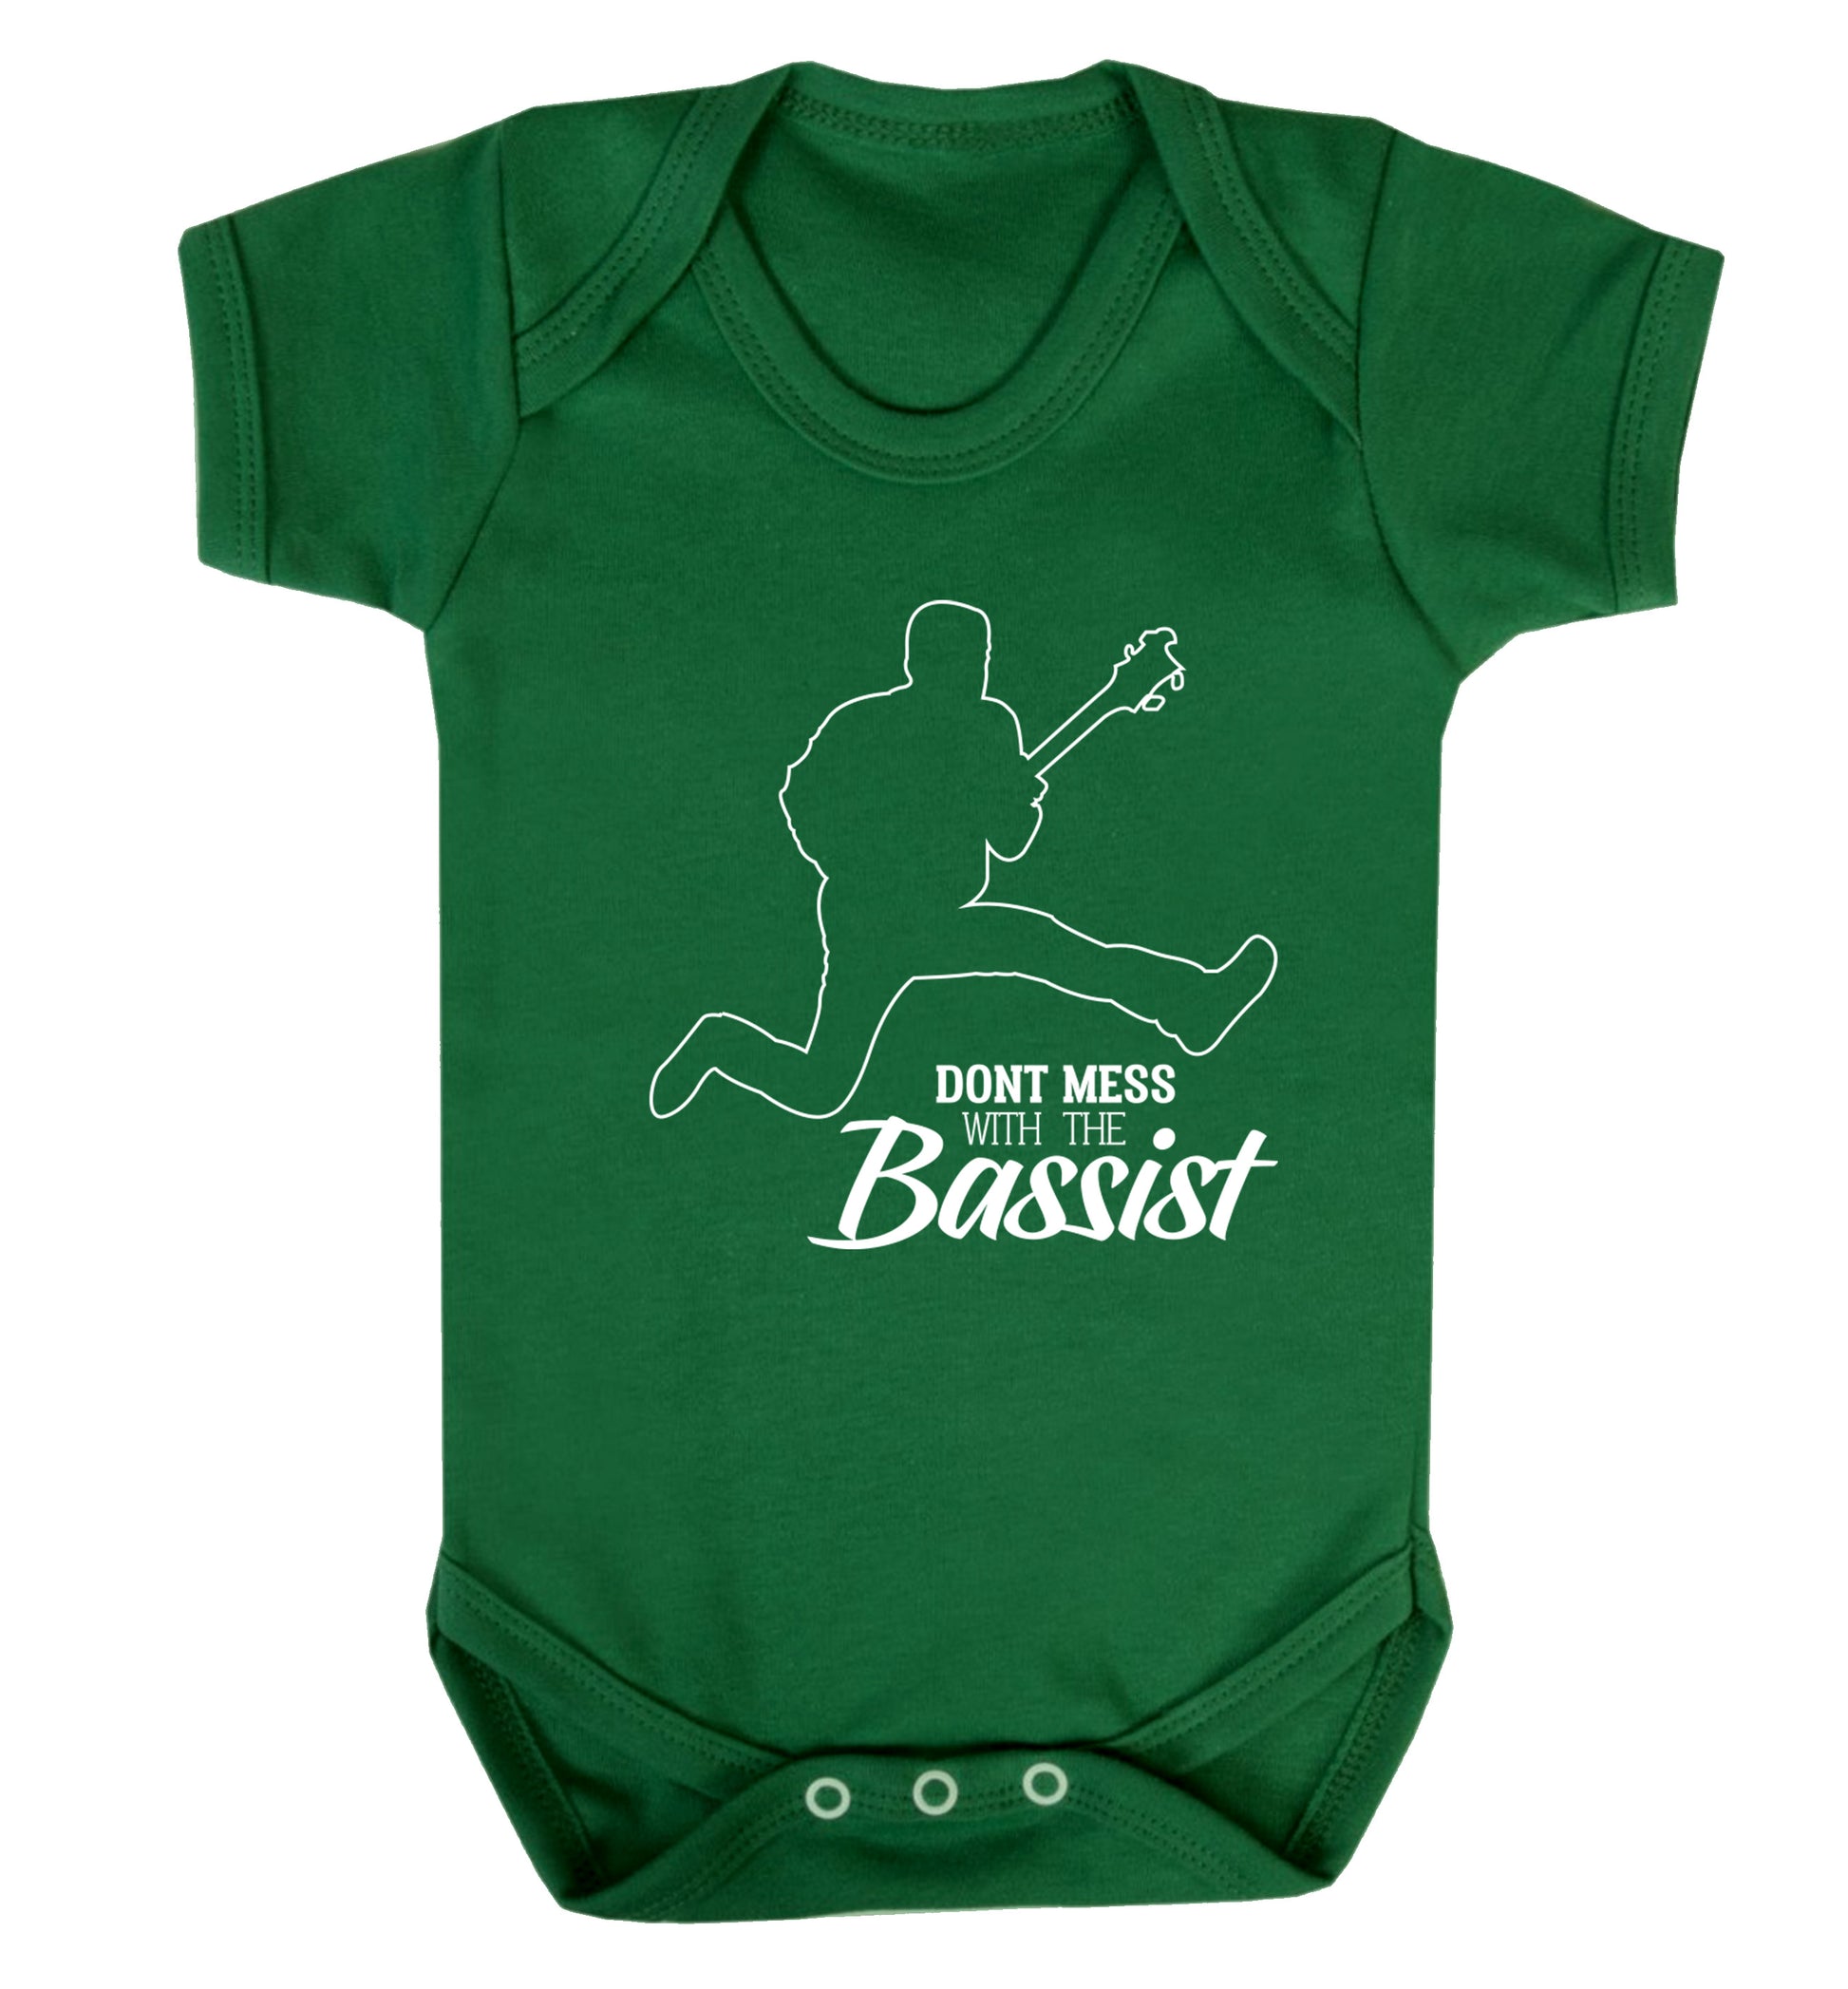 Dont mess with the bassist Baby Vest green 18-24 months